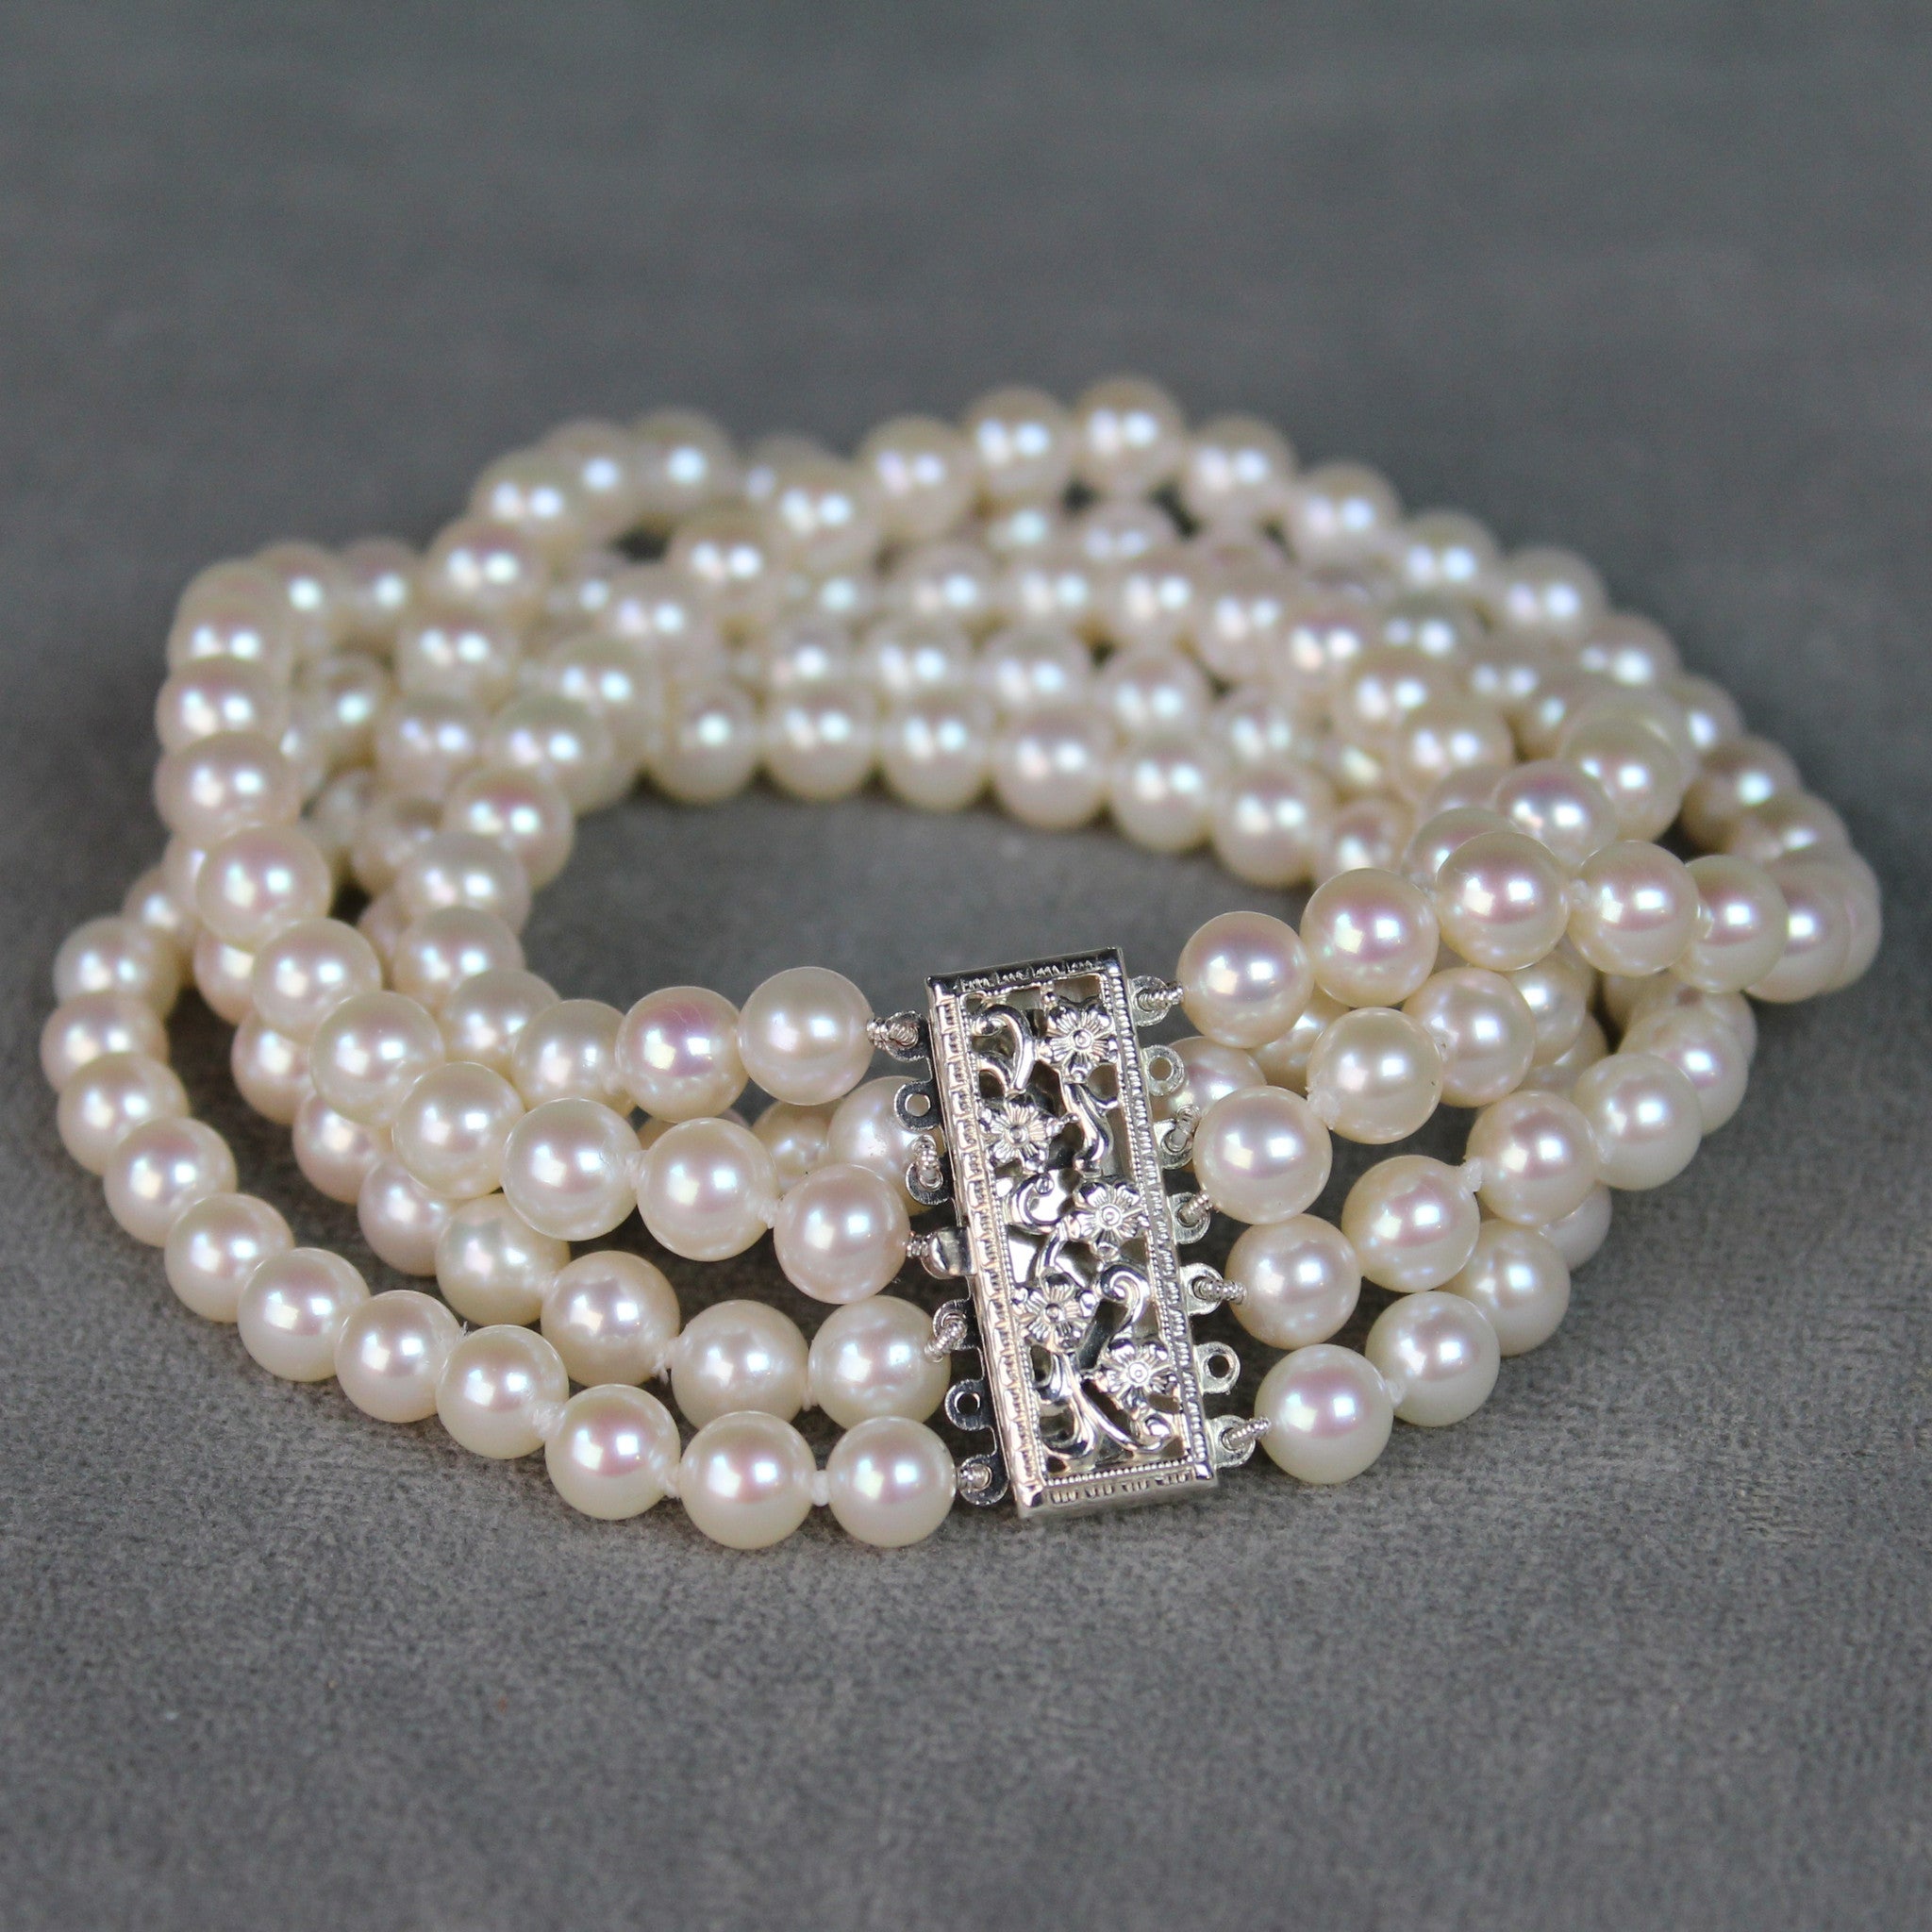 White Pearl 5 Multi-Strand Bracelet | AAA 5.5-6 mm Cultured Freshwater Pearls with choice of clasp Jewelry,Bracelet Bourdage Pearl Jewelry    sherri bourdage